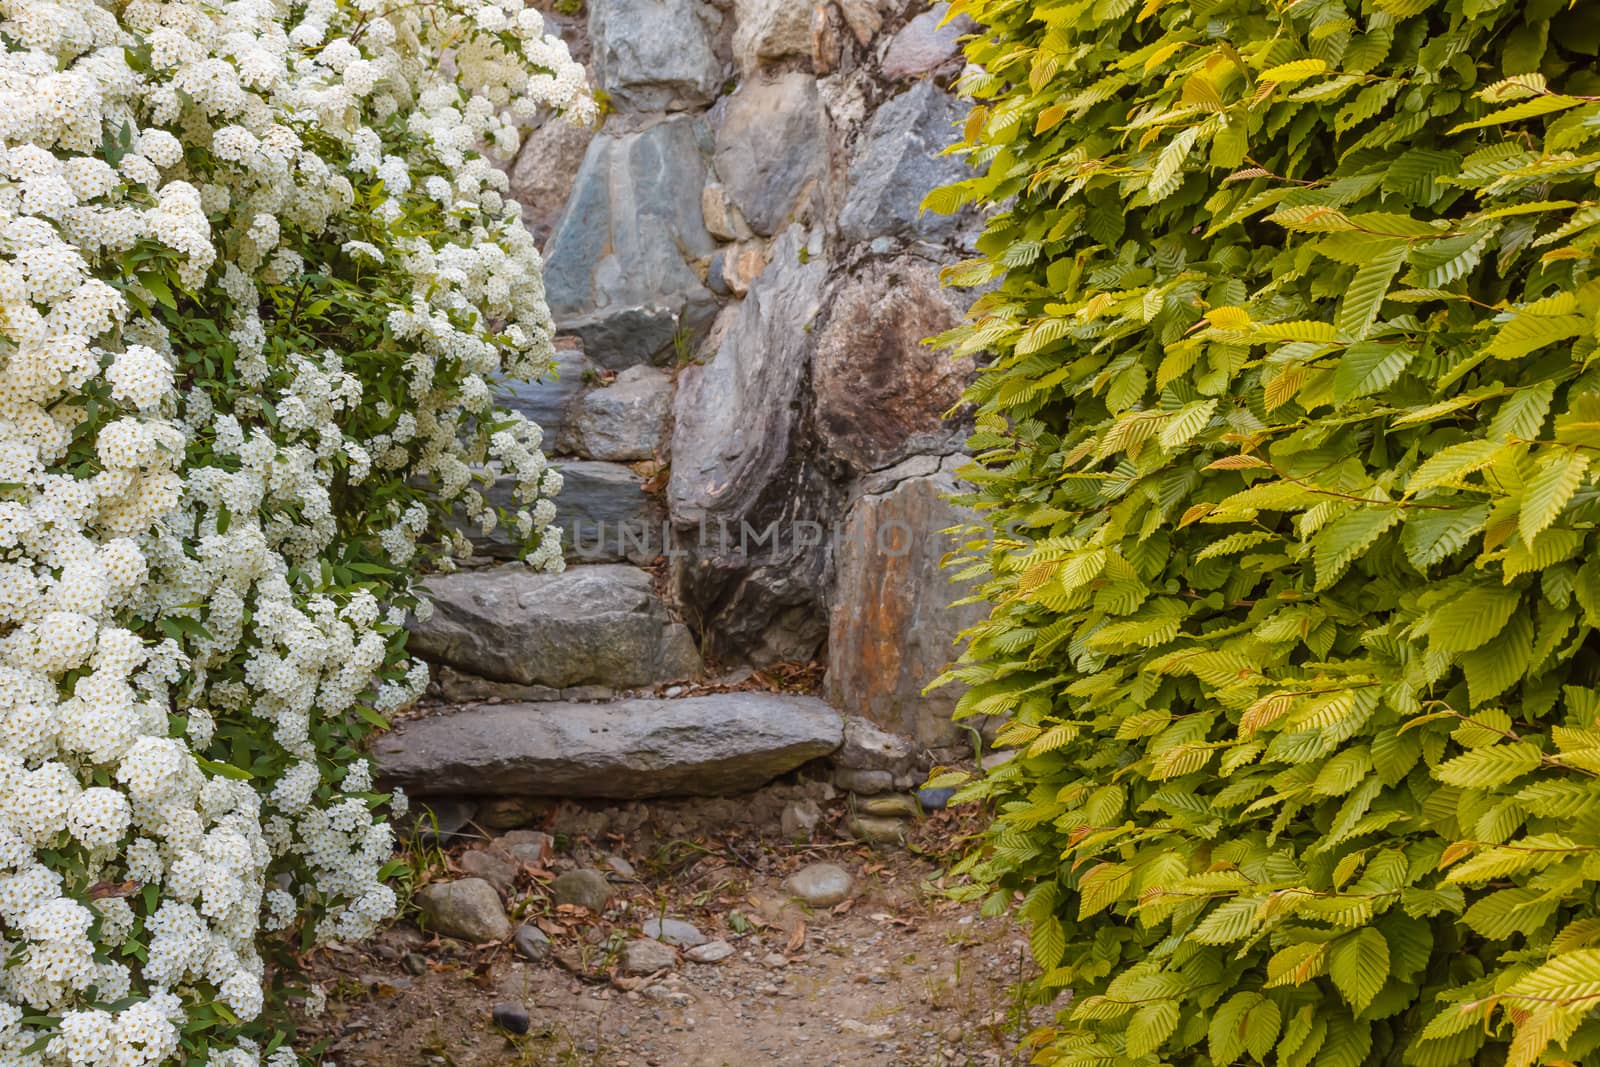 A bush of white flowers spirea leads to a stone staircase